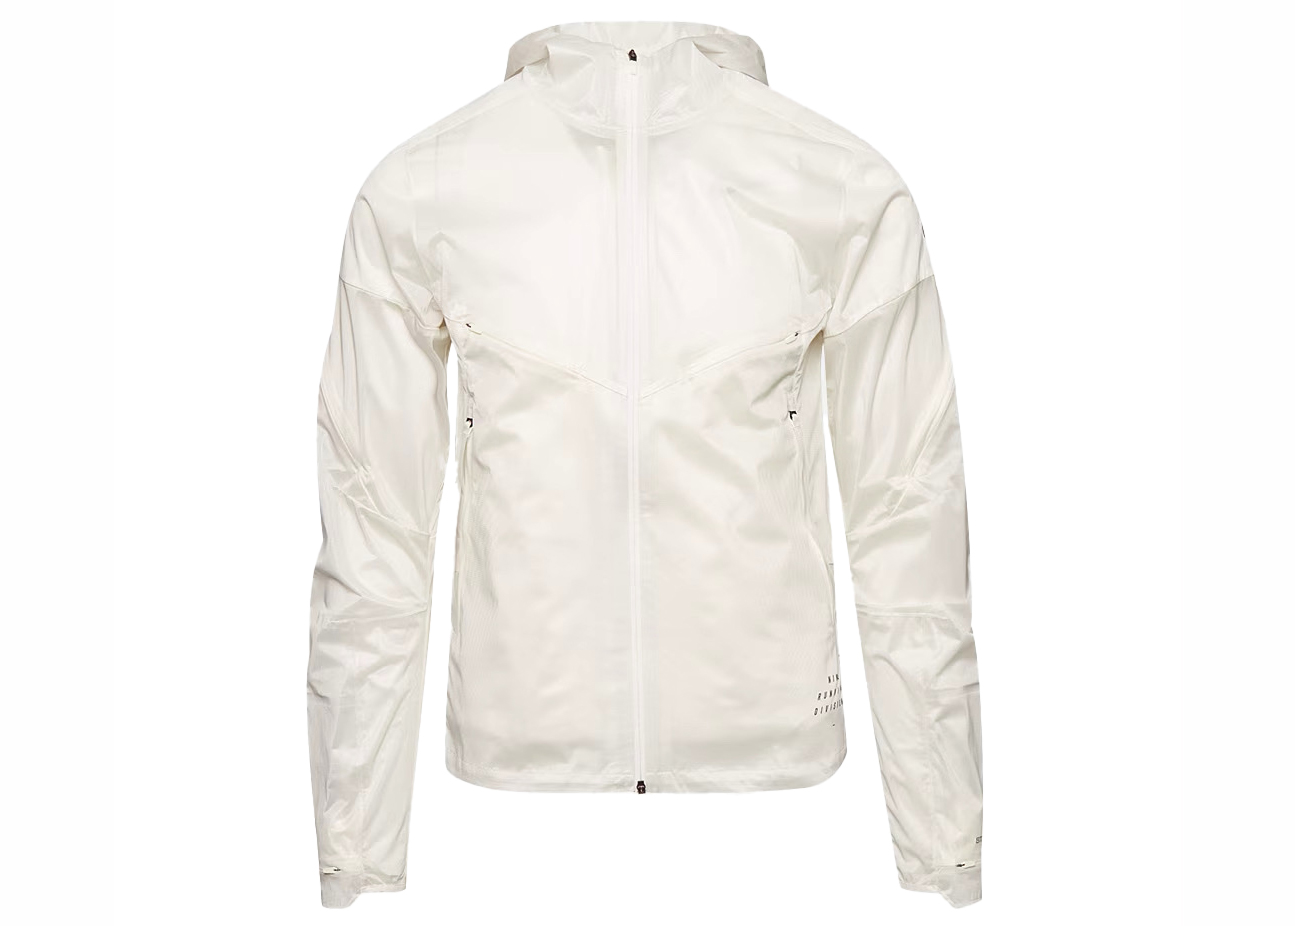 Nike Storm-Fit ADV Run Division Waterproof Jacket White